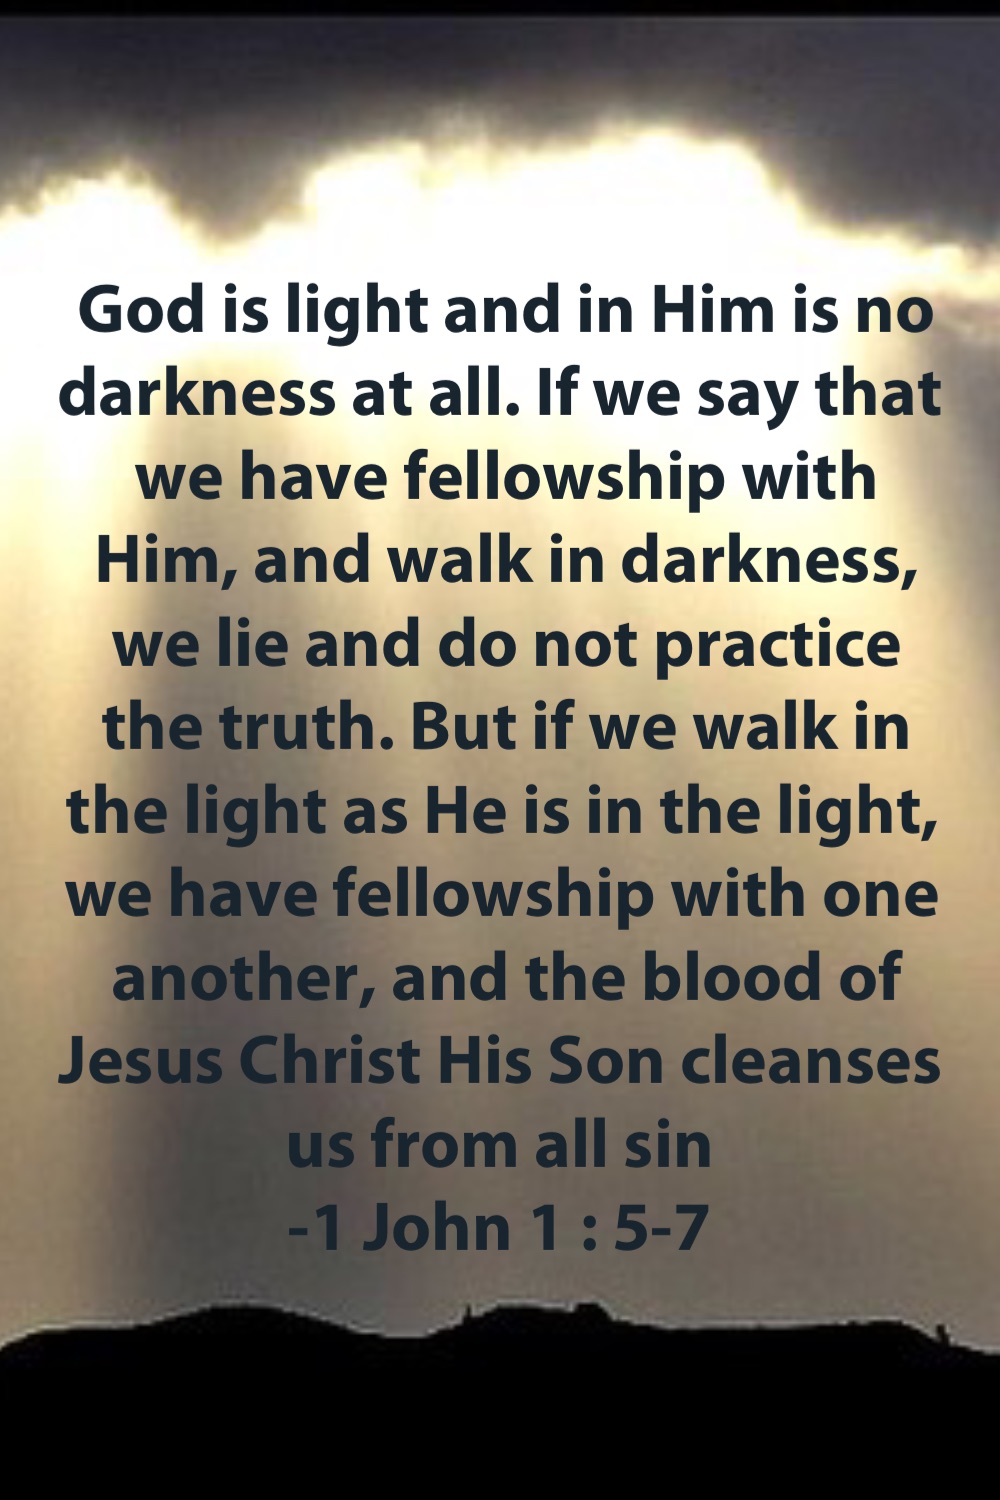 God is light and in Him is no darkness at all. If we say that we have fellowship with Him, and walk in darkness, we lie and do not practice the truth. But if we walk in the light as He is in the light, we have fellowship with one another, and the blood of Jesus Christ His Son cleanses us from all sin
-1 John 1 : 5-7